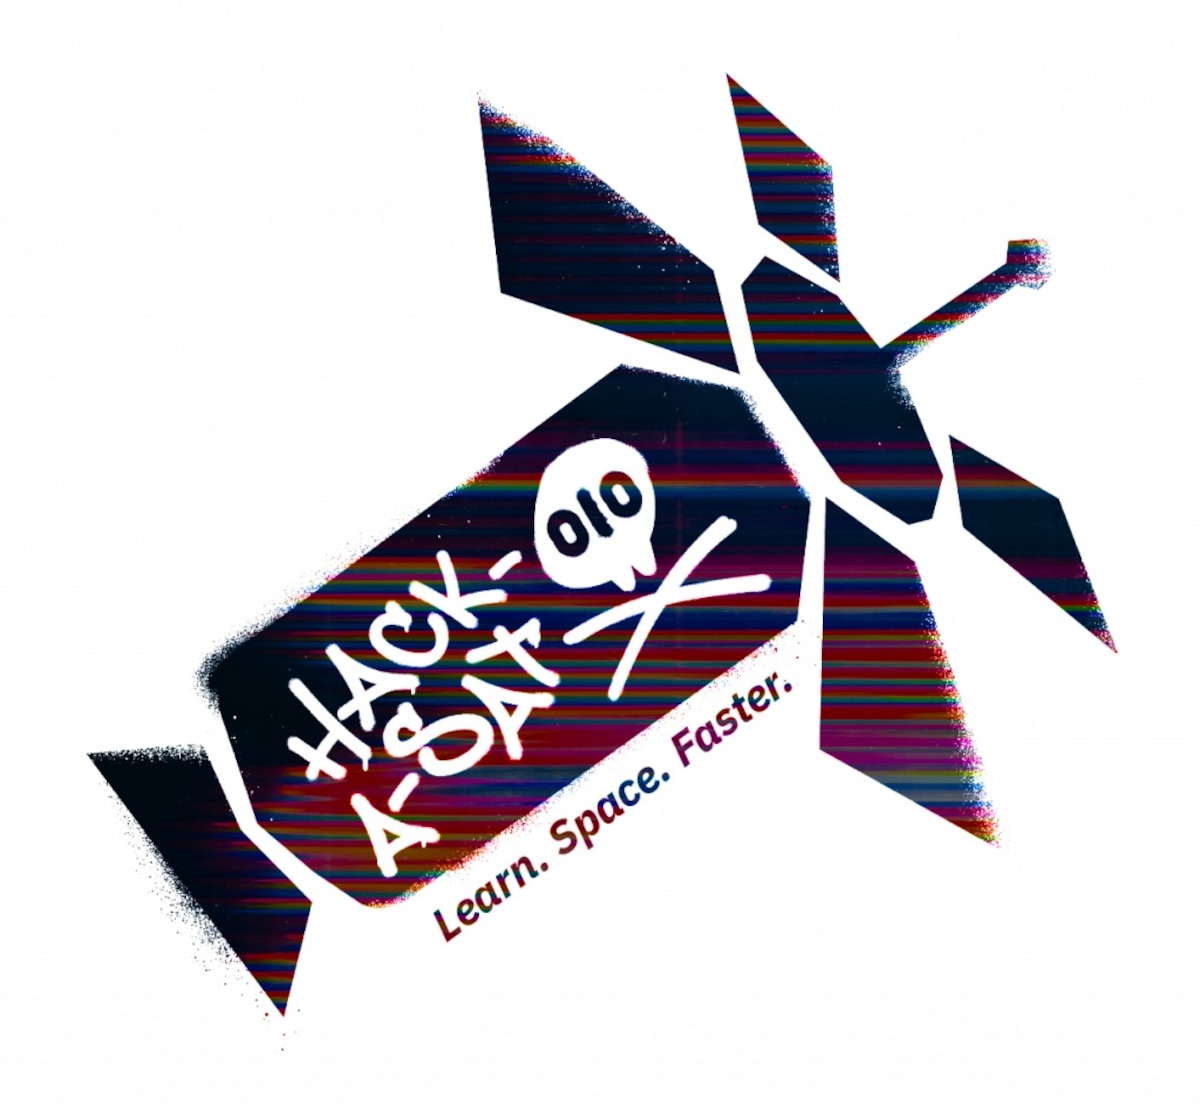 The Department of the Air Force, in collaboration with the Air Force Research Laboratory and Space Systems Command, opened registration Feb. 22, 2023, for the qualification round of the fourth annual “Hack-A-Sat” competition, the world’s first satellite hacking contest hosted on an on-orbit satellite. Learn more at https://hackasat.com/. (Courtesy photo)